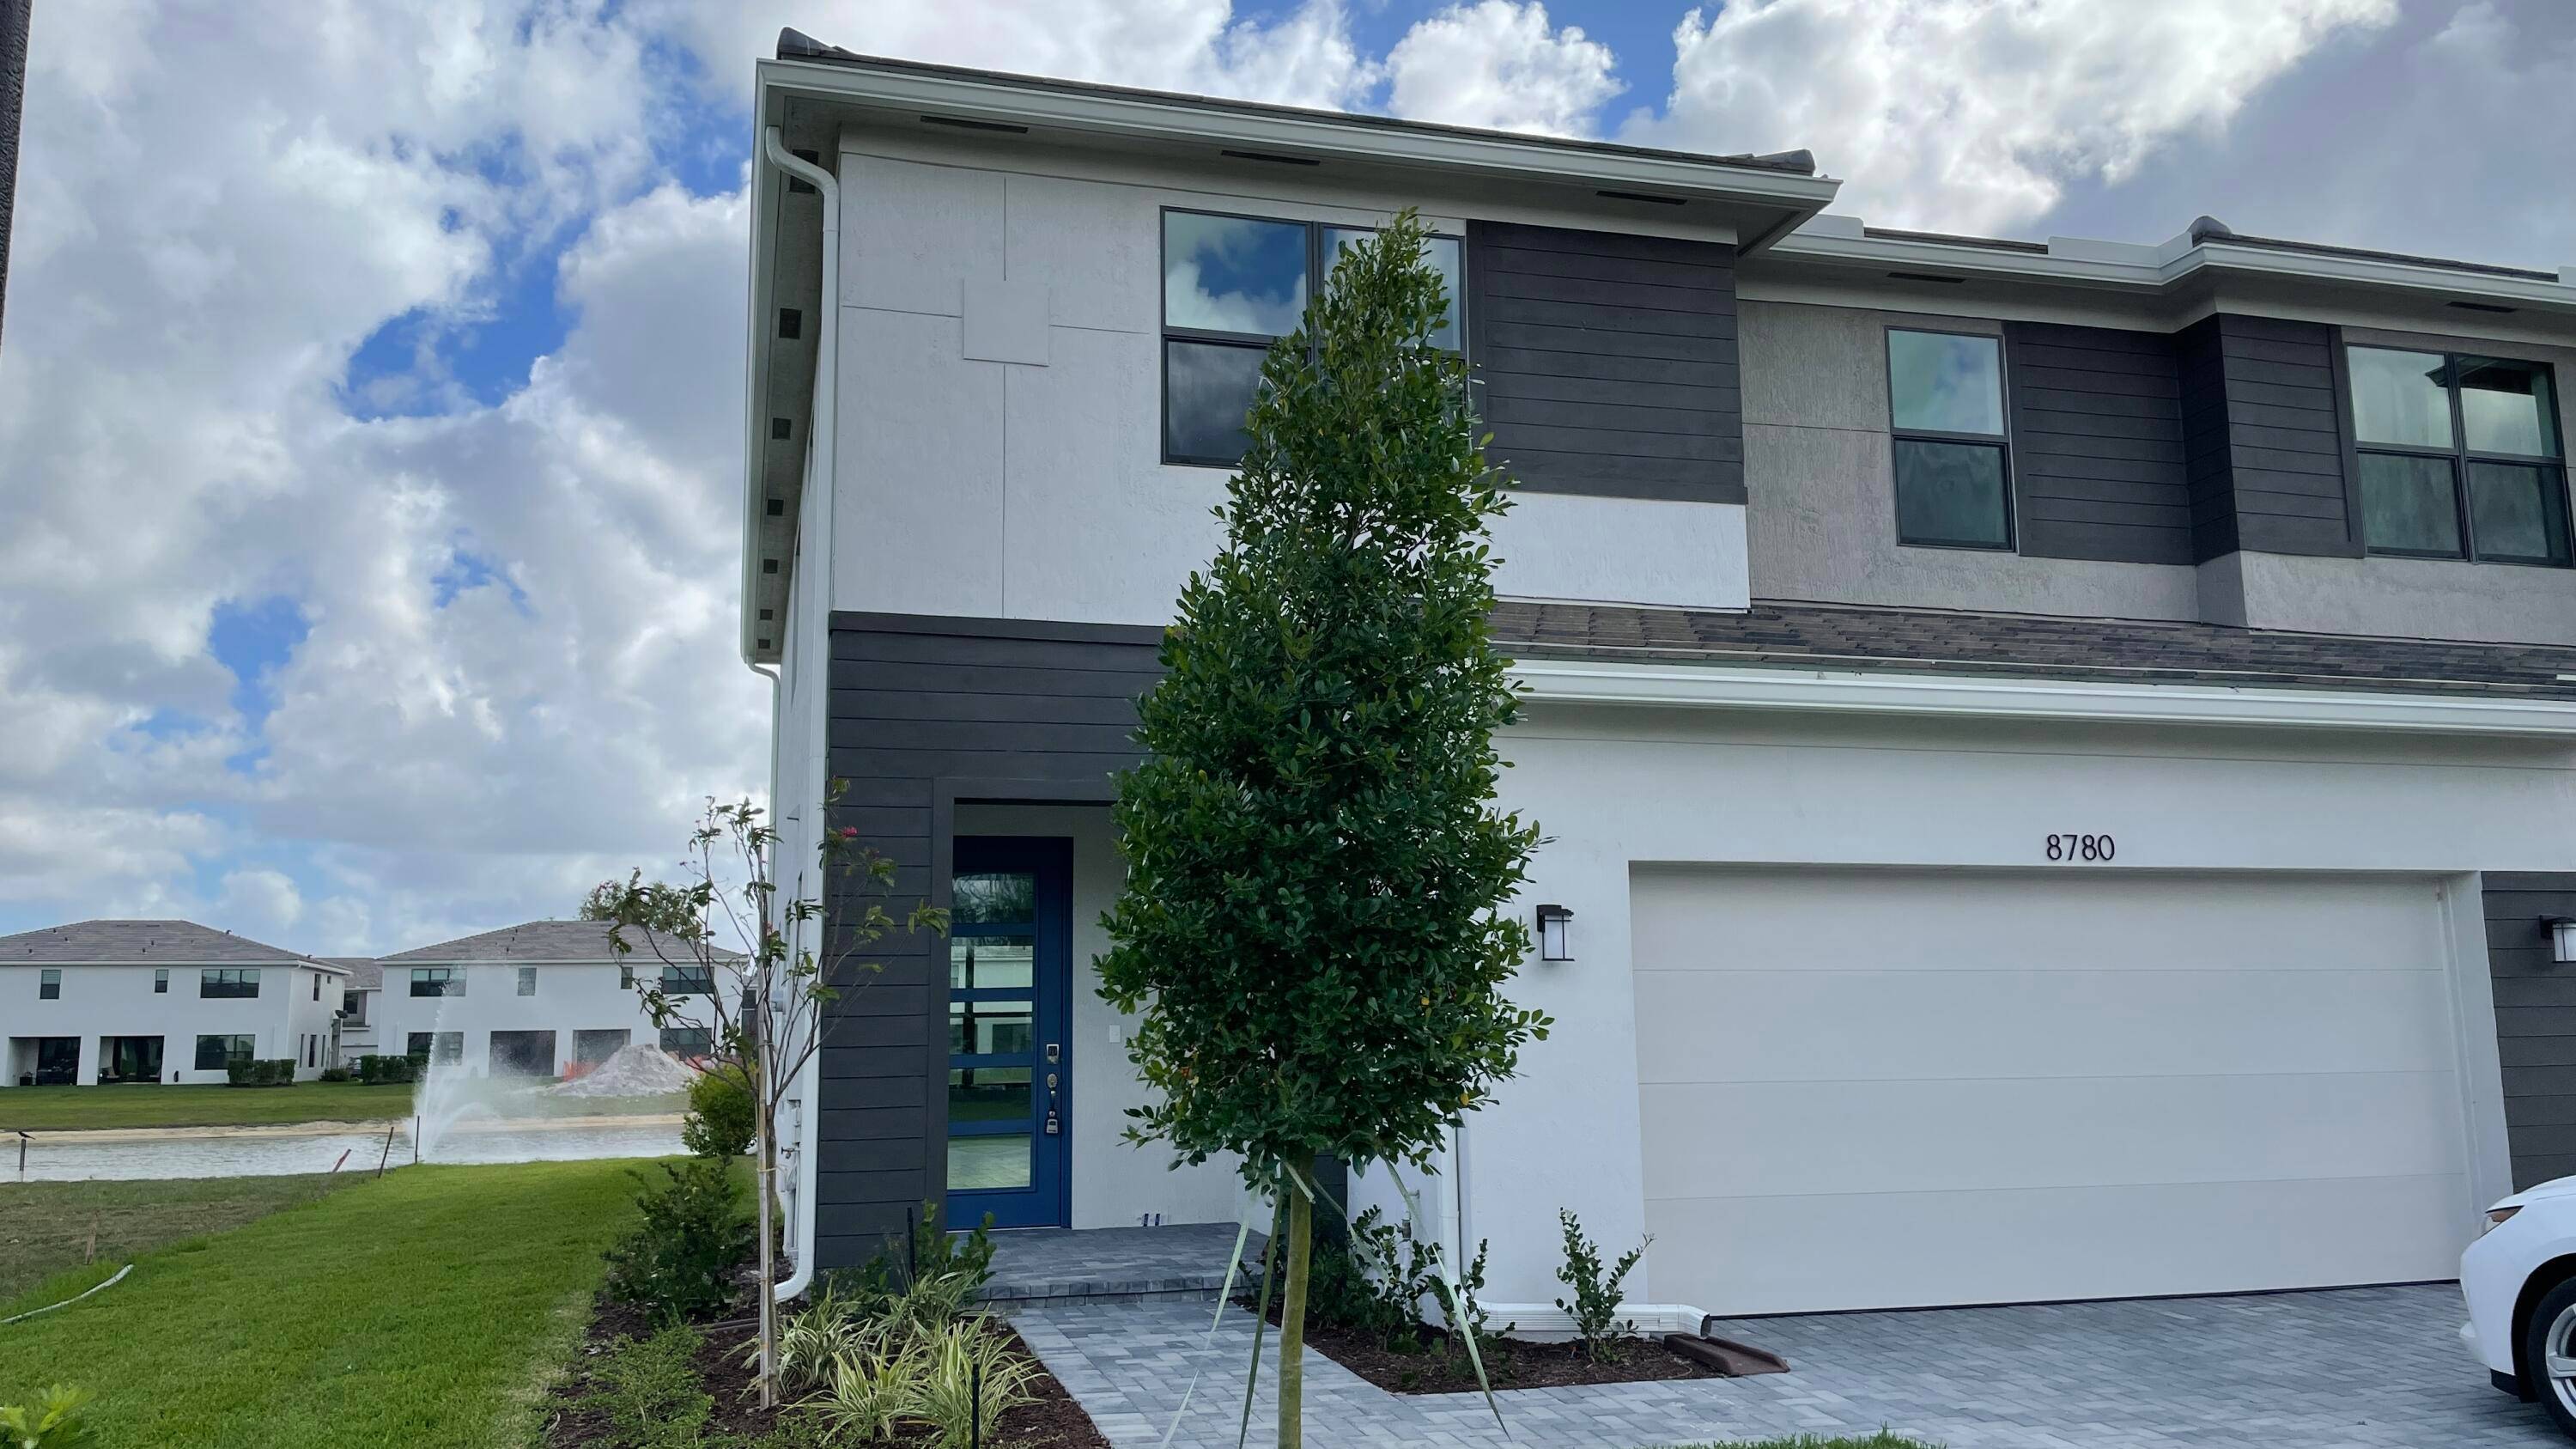 Presenting Saddlewood a remarkable new community in Lake Worth, just moments away from restaurants, Publix, and shopping destinations !